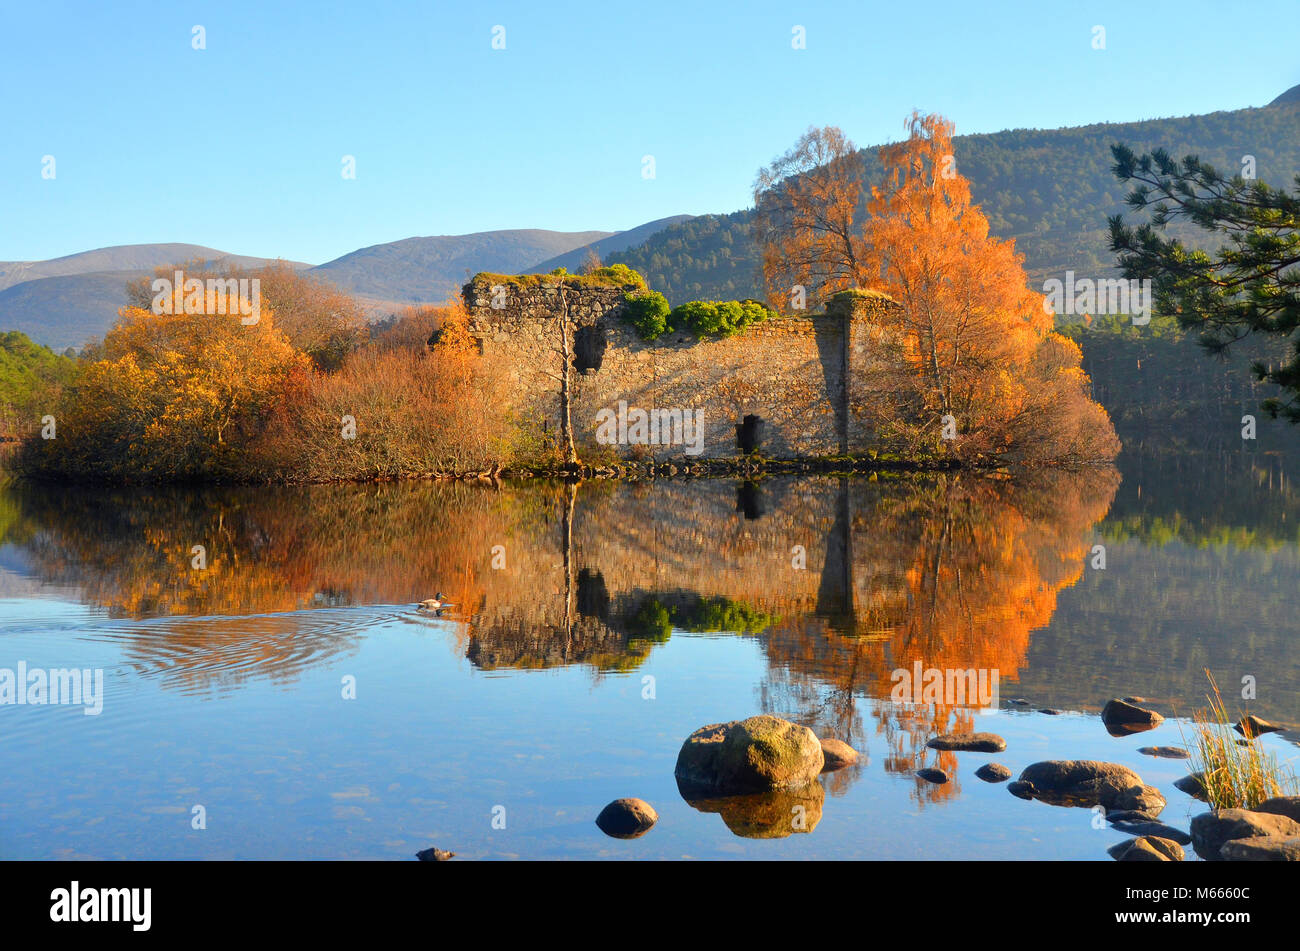 Autumn reflection of the ruined castle on Loch an Eilean - Cairngorm national park, highlands, Scotland. Stock Photo